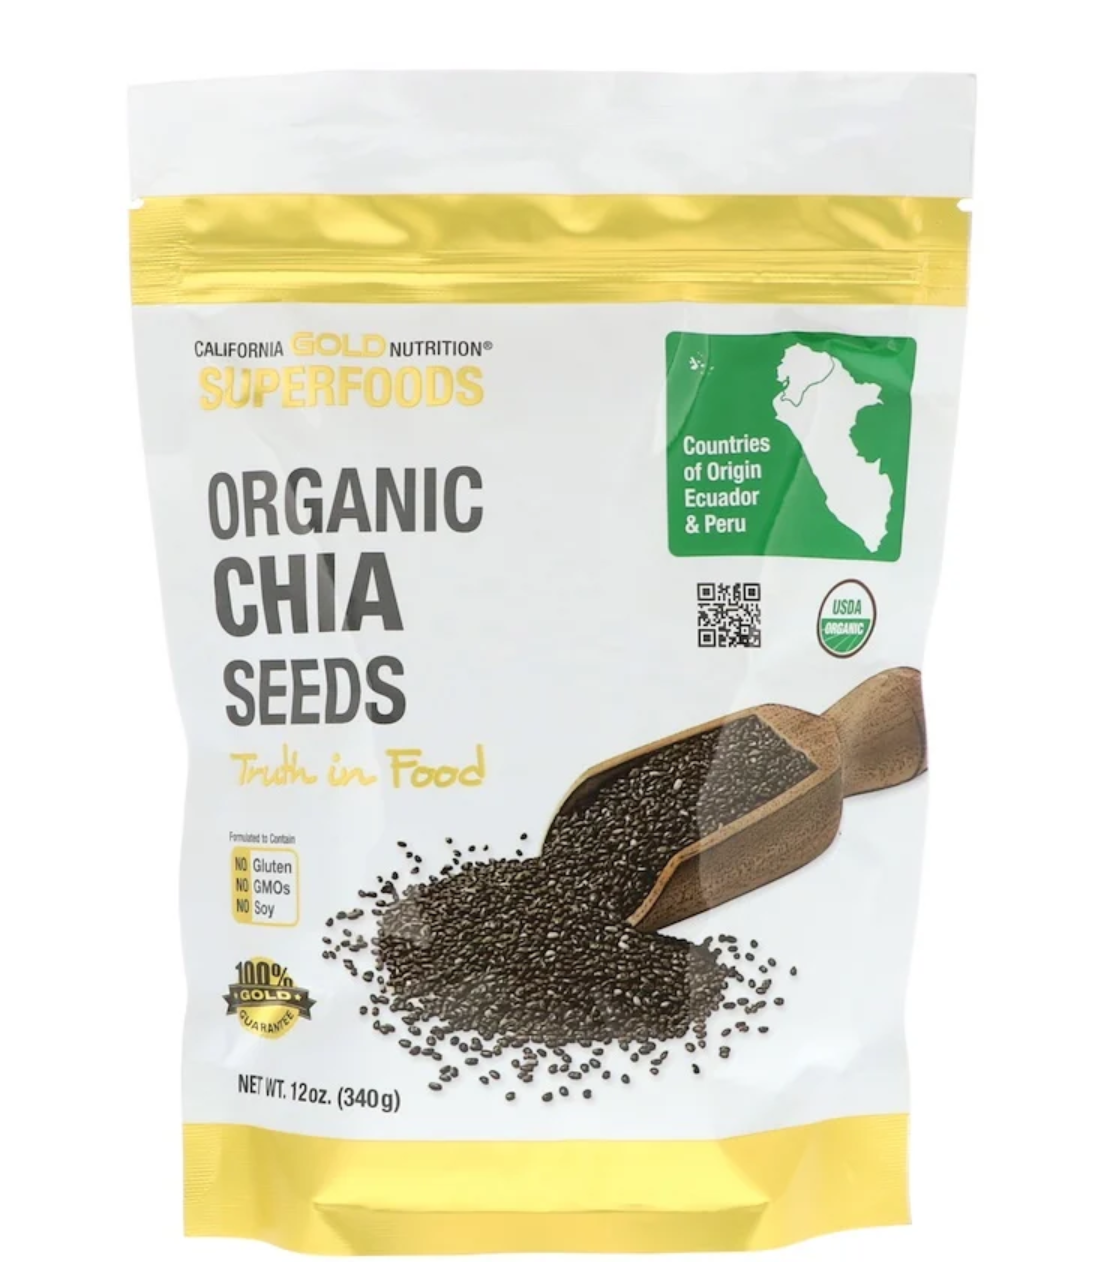 California Gold Nutrition, Superfoods, Organic Chia Seeds, 340 g